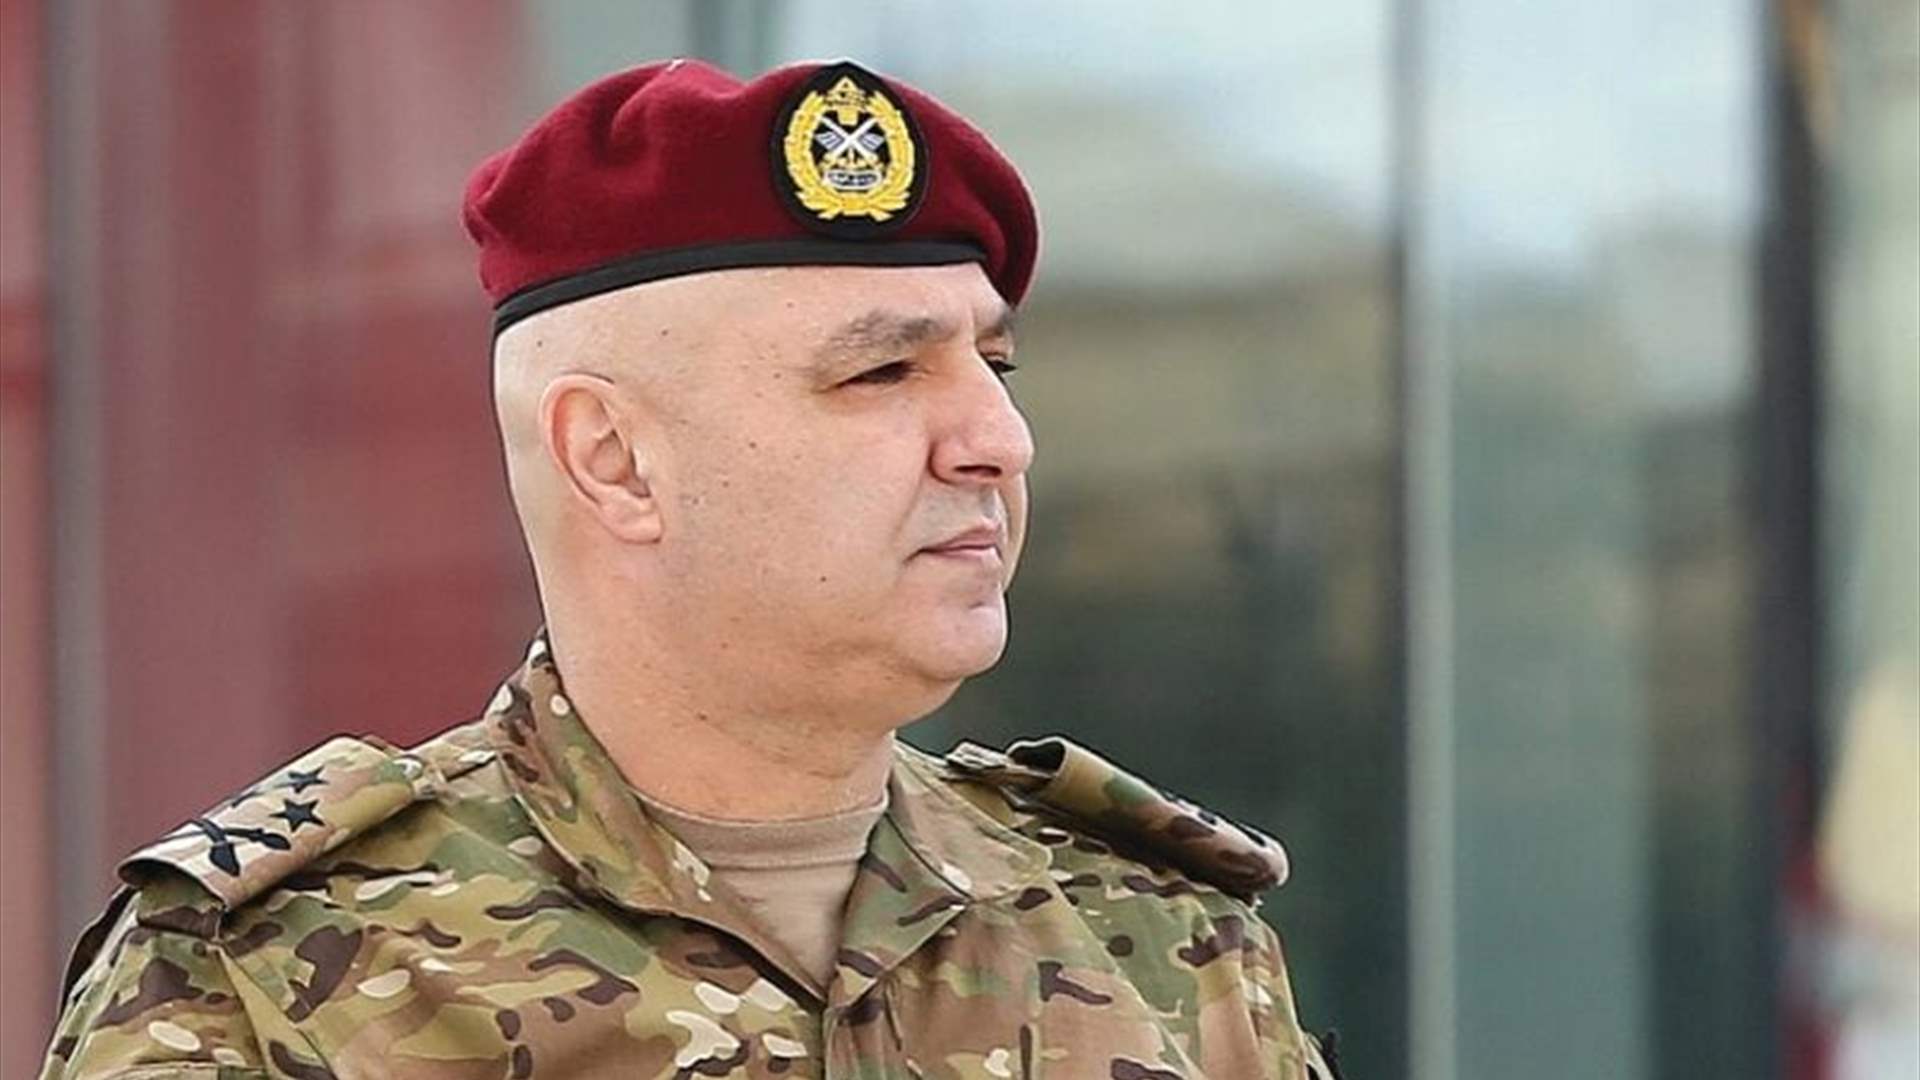 Conflict over Extension for Army Commander Likely to Spill onto the Streets